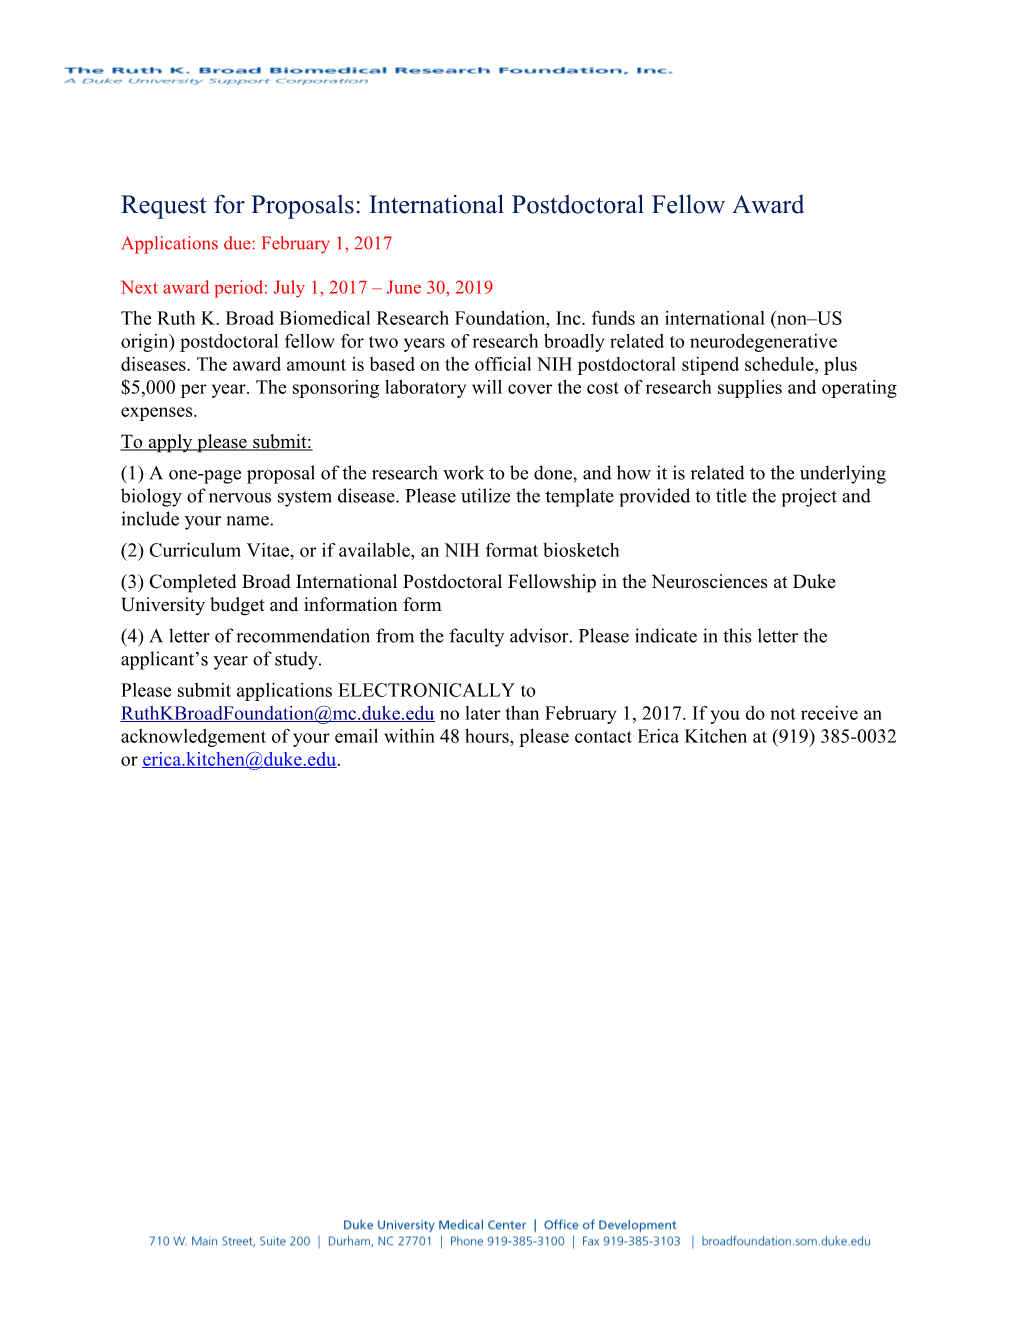 Request for Proposals: International Postdoctoral Fellow Award